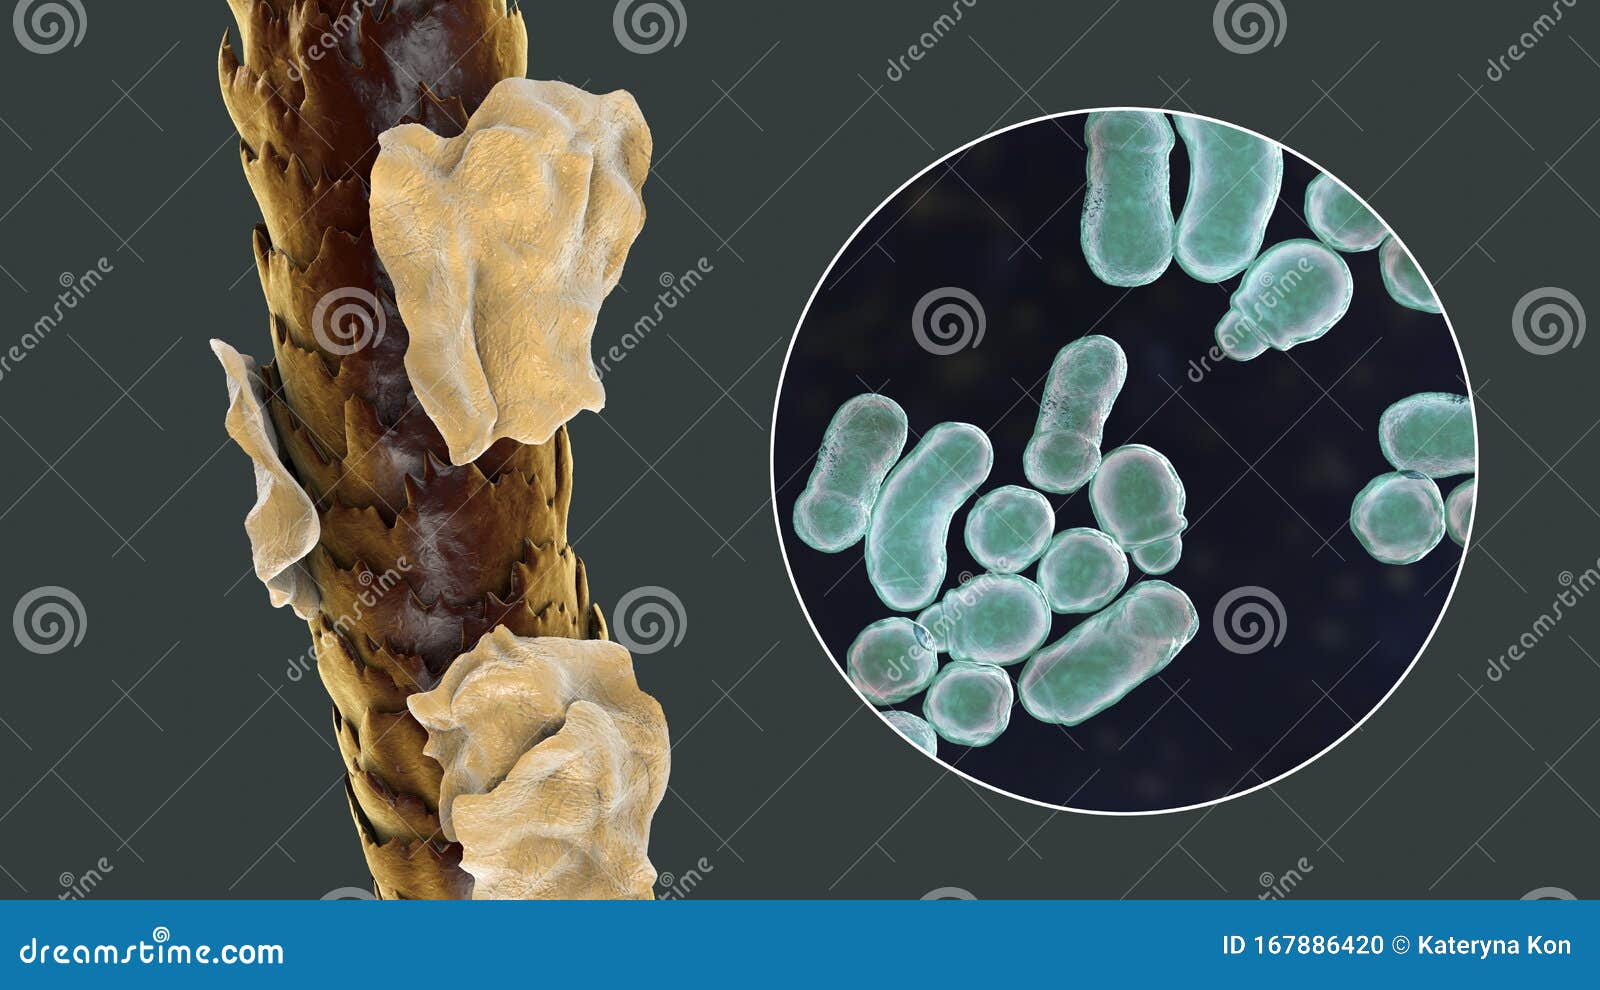 Human Hair with Dandruff and Close-up View of Microscopic Fungi Malassezia  Furfur Stock Illustration - Illustration of science, foot: 167886420